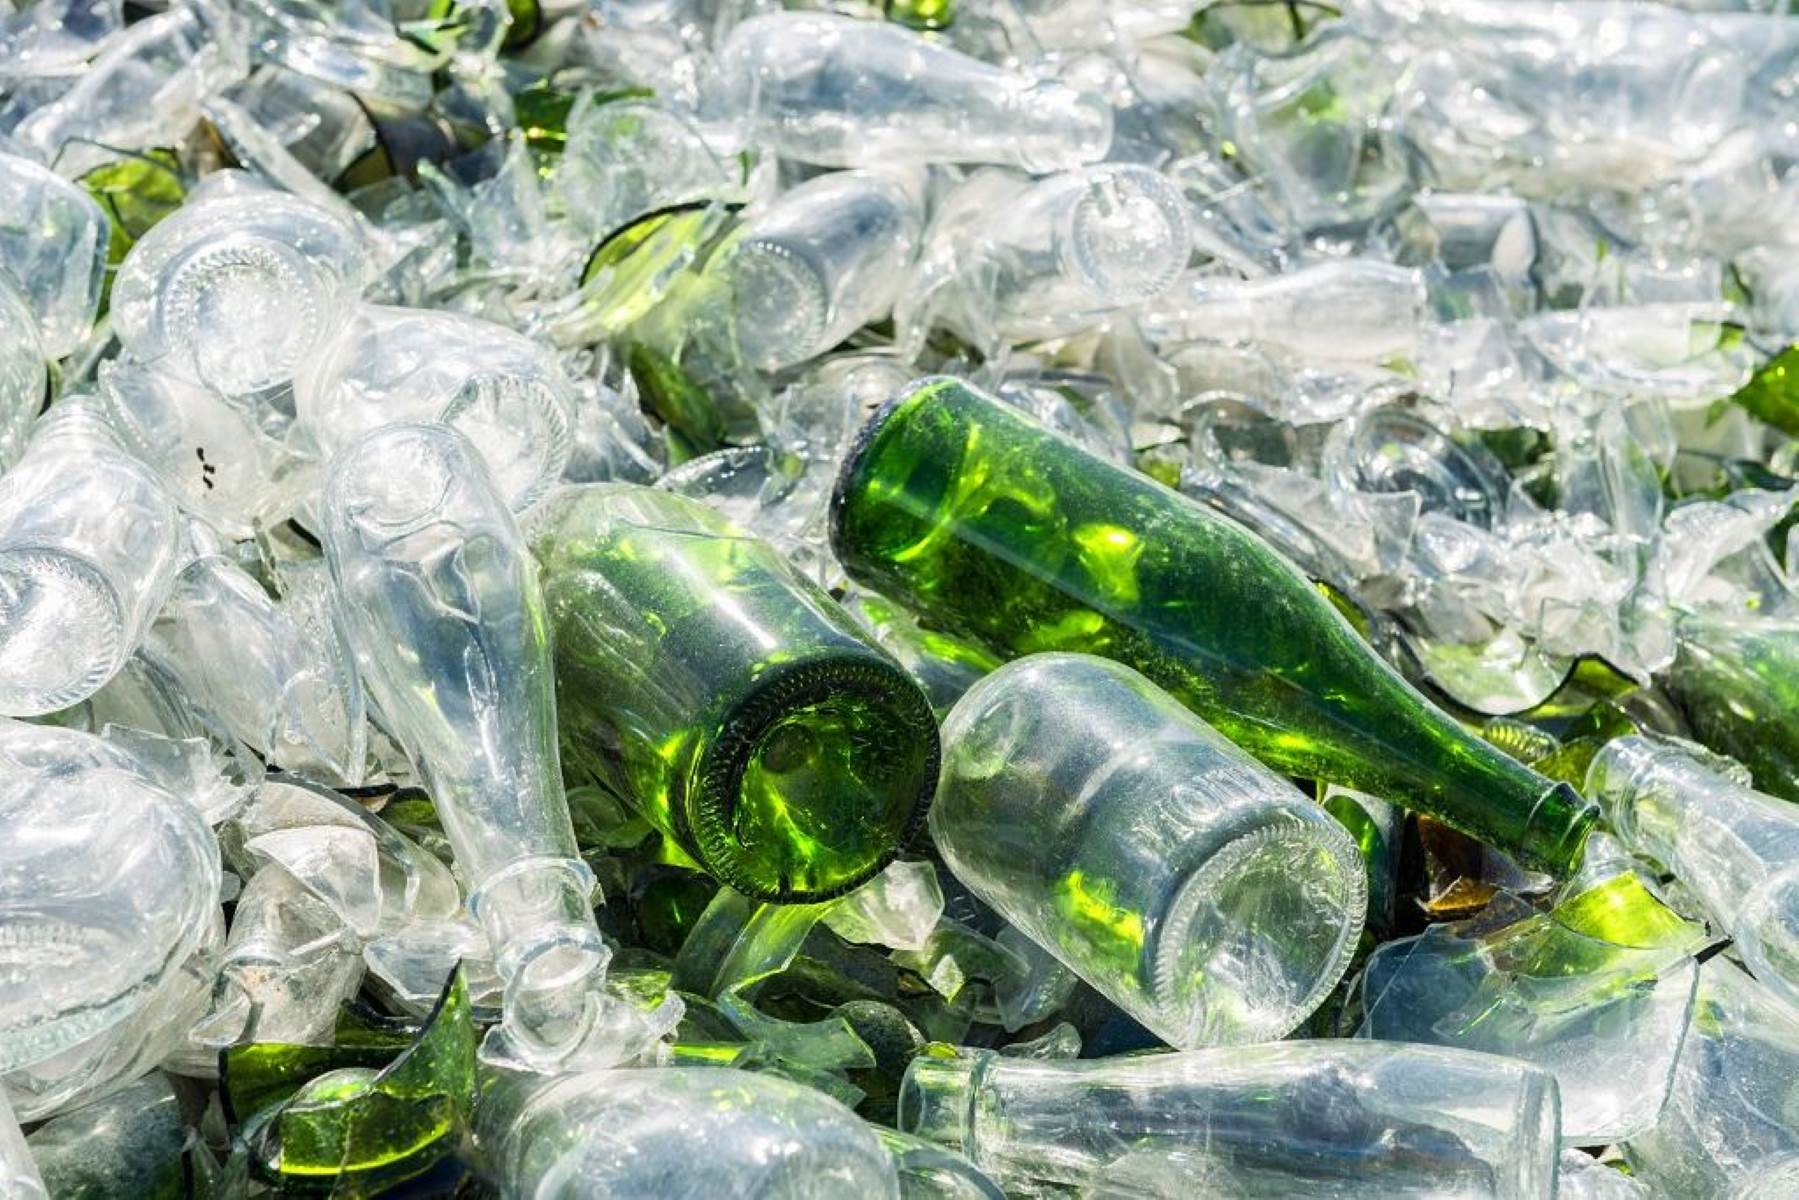 Who Buys Glass For Recycling